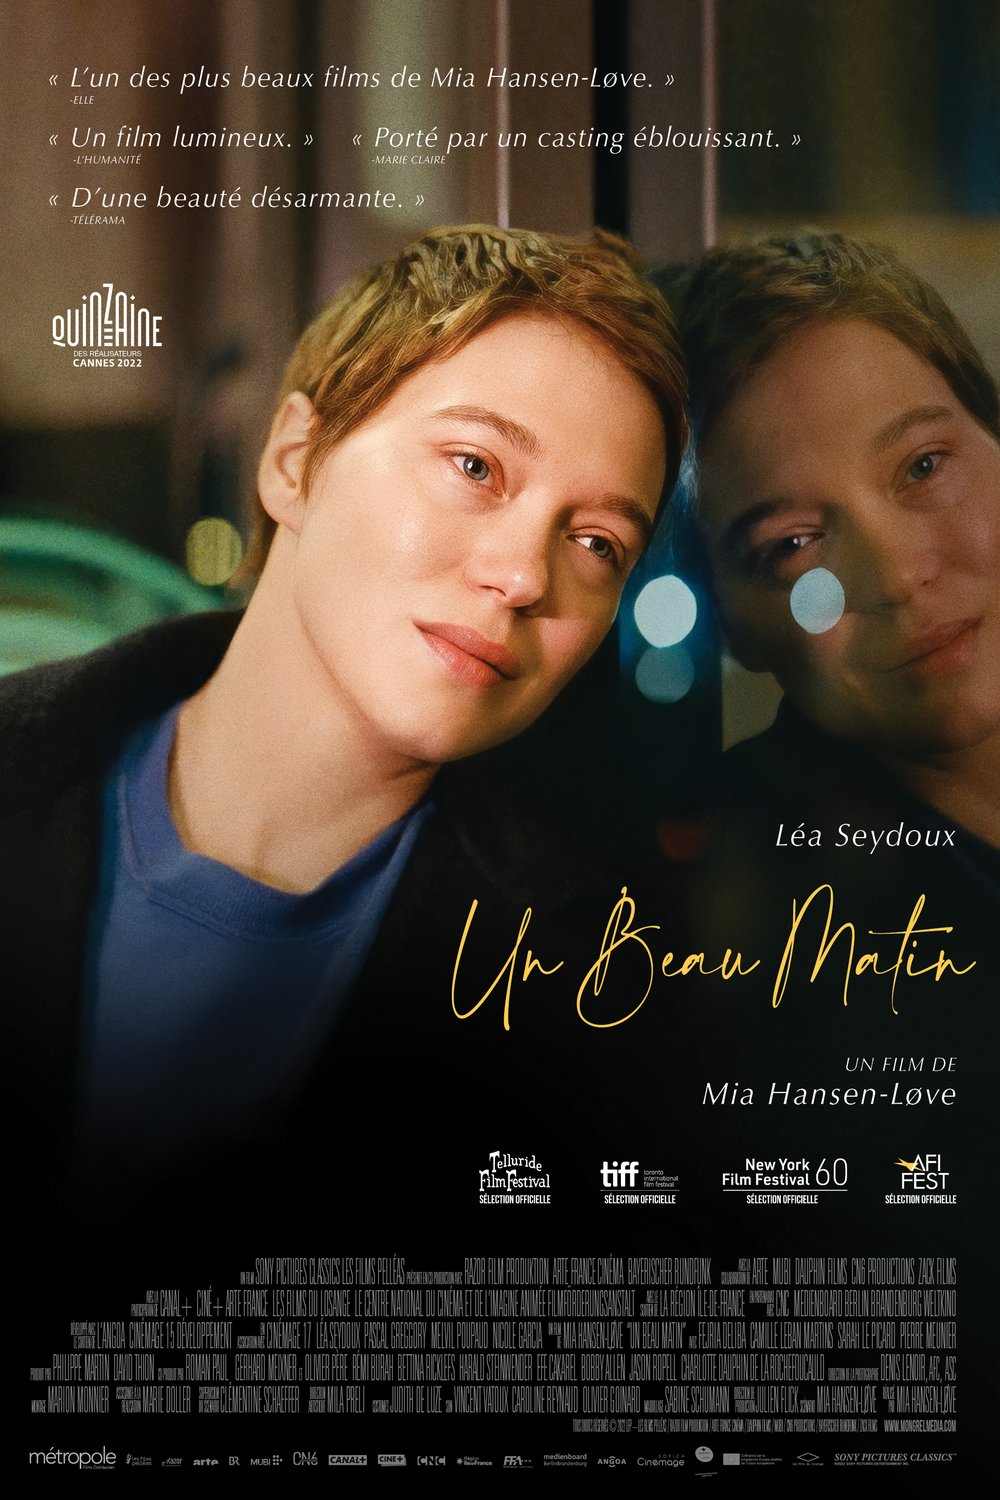 Poster of the movie Un beau matin